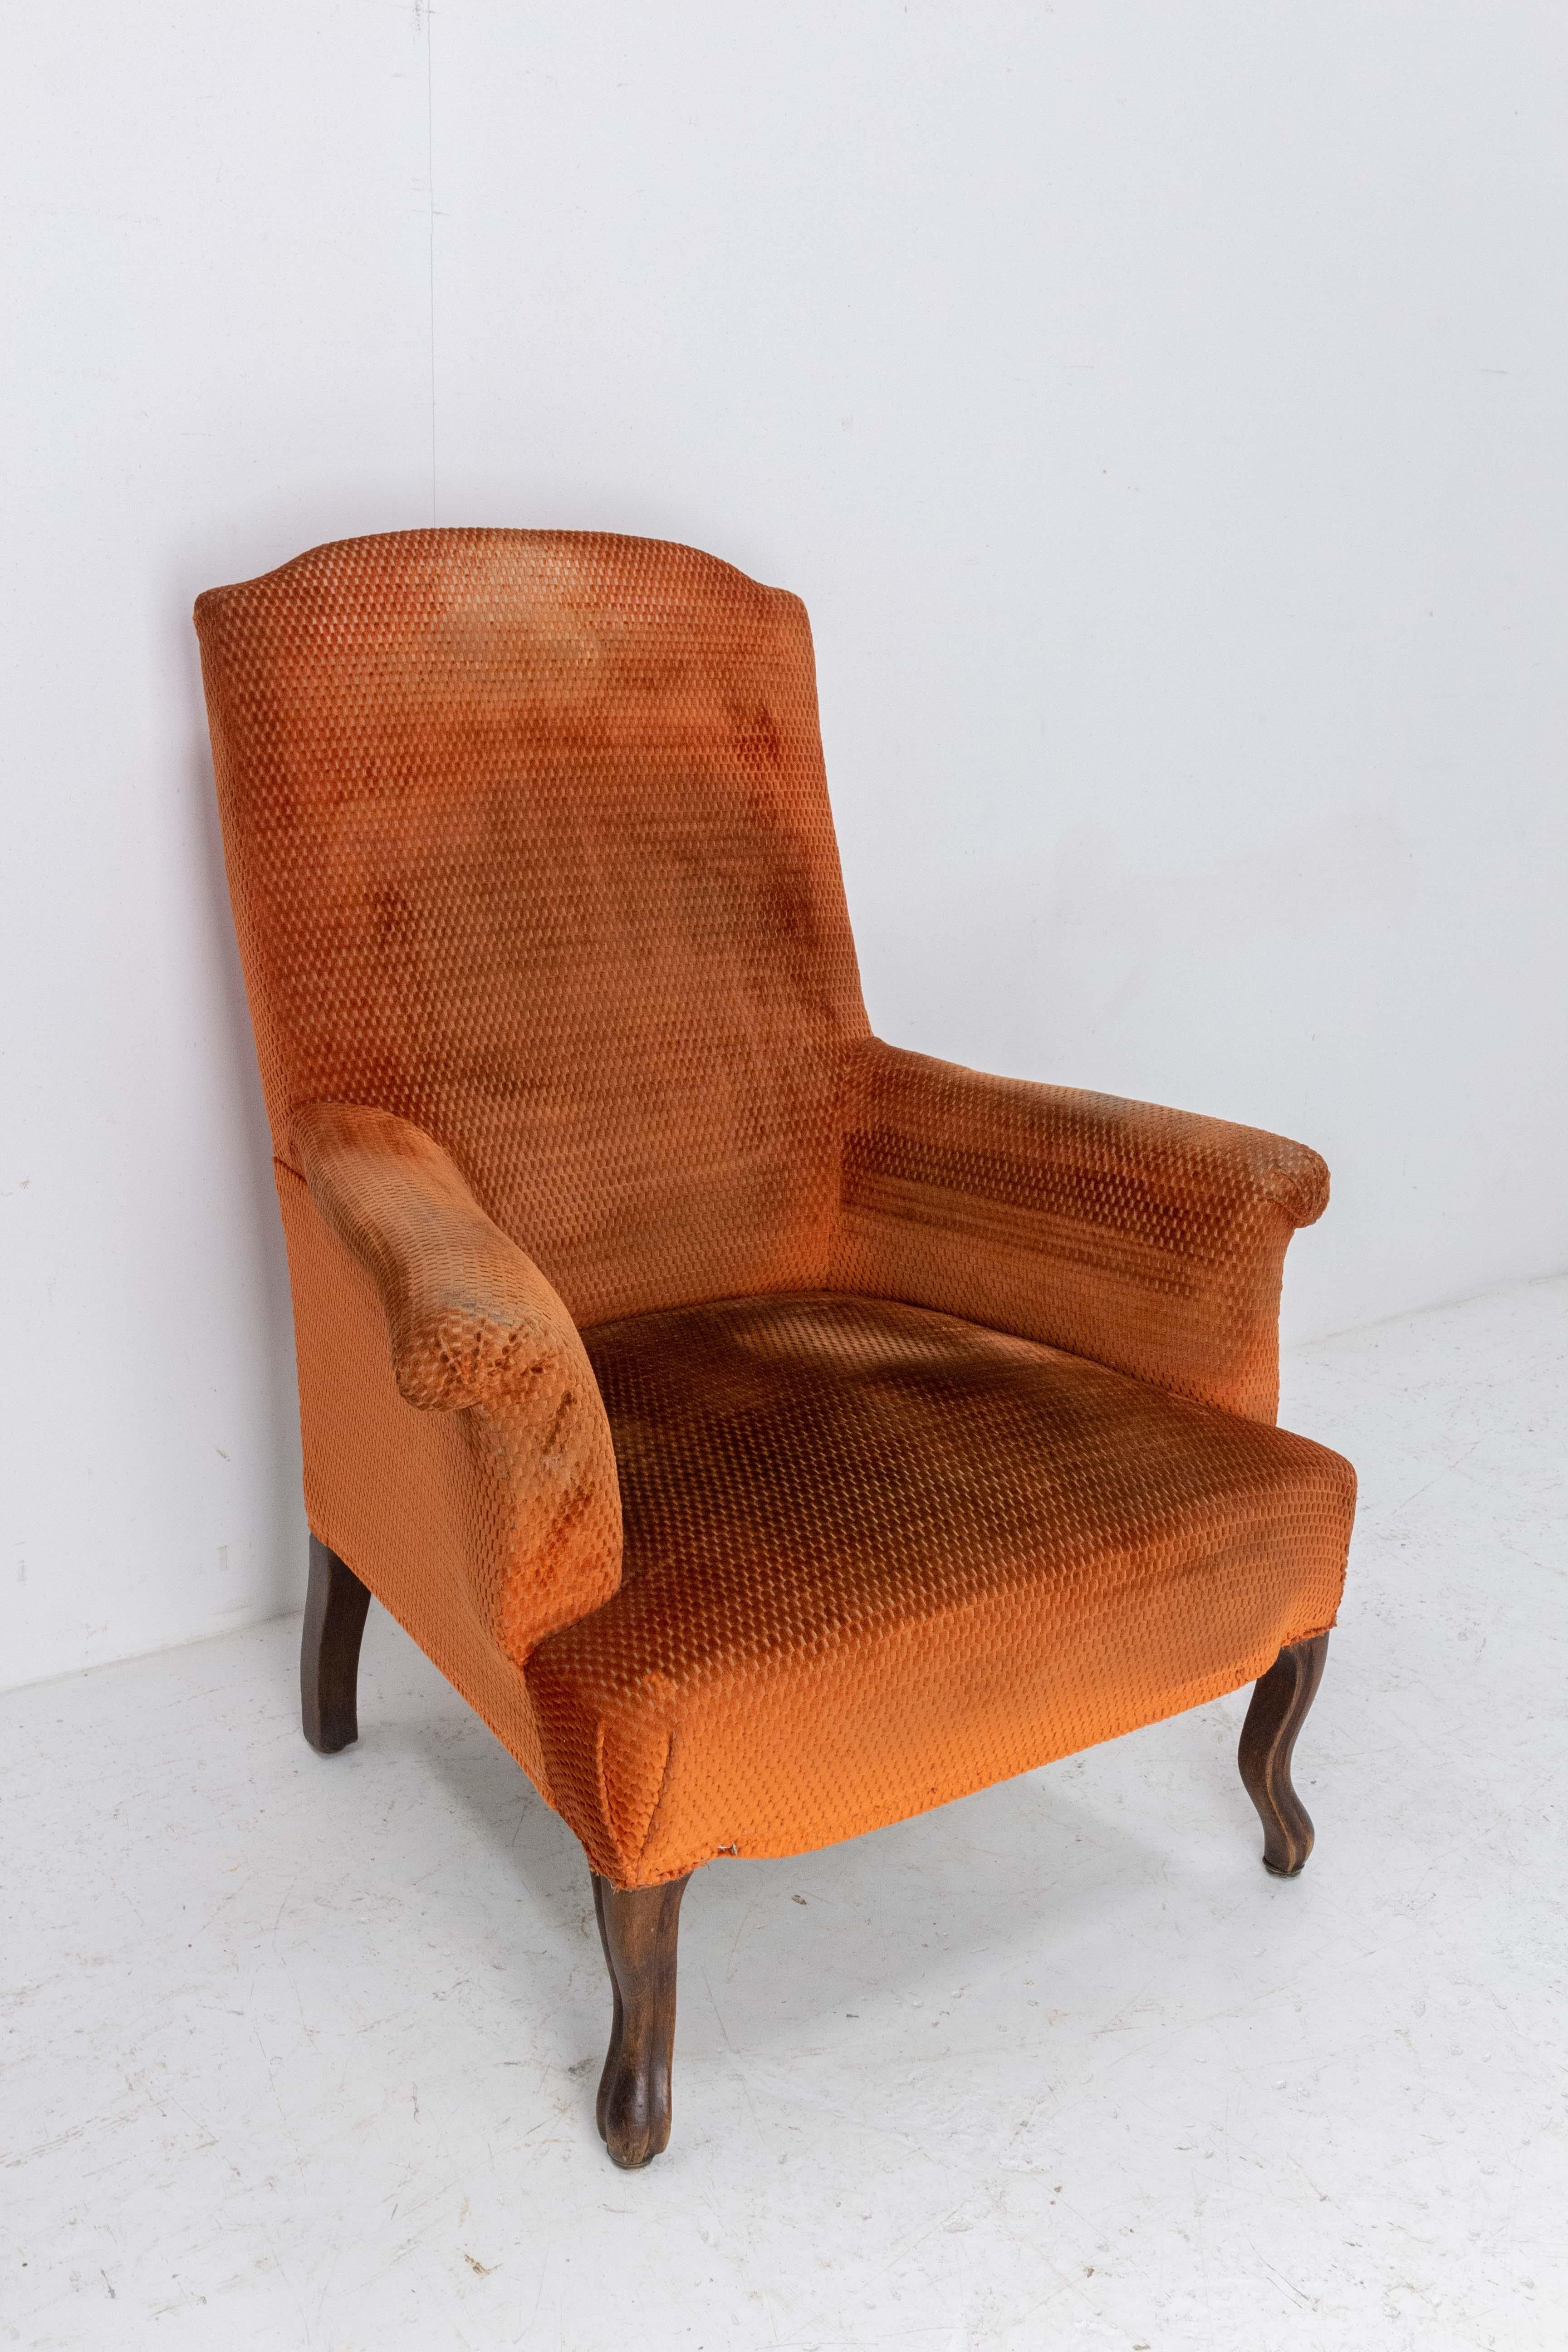 Antique Armchair Fauteuil Napoleon III Upholstery and Walnut French 19th Century In Good Condition For Sale In Labrit, Landes